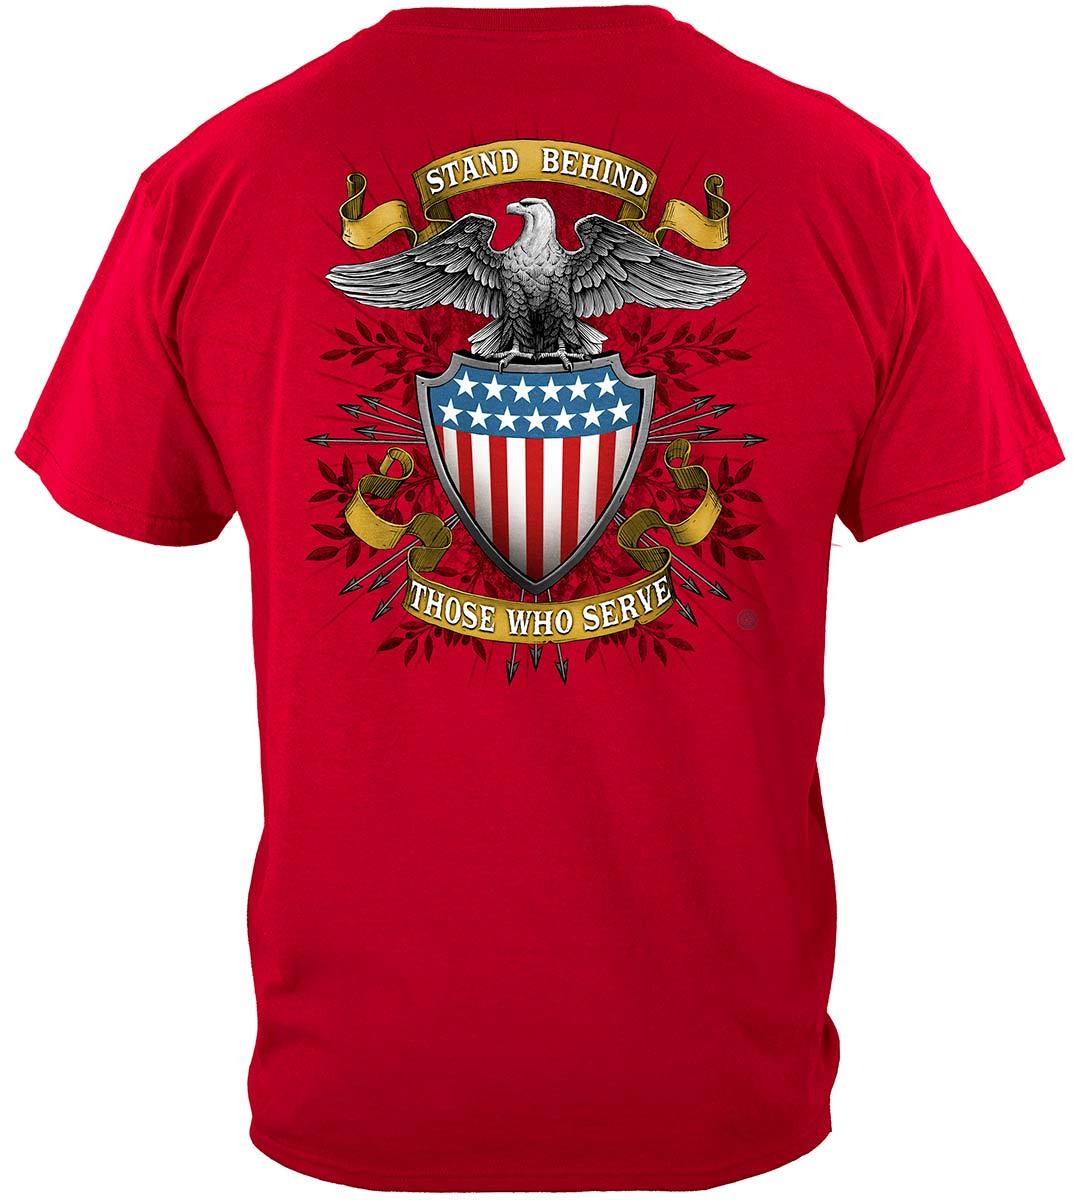 Stand Behind Those Who Serve Premium T-Shirt